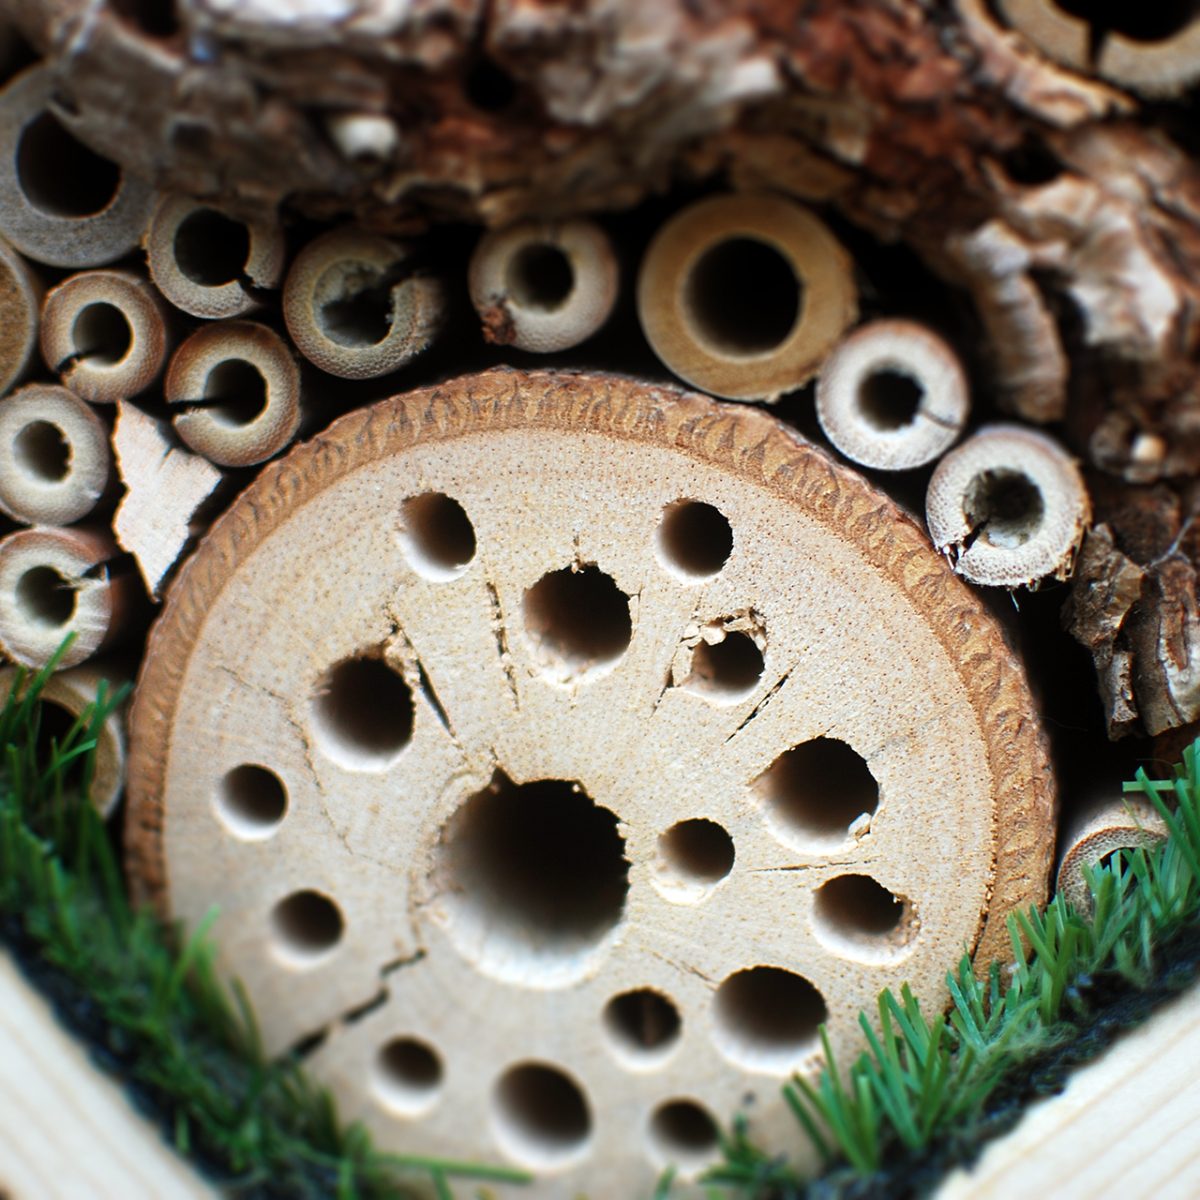 Detail of the Insect Hotel.